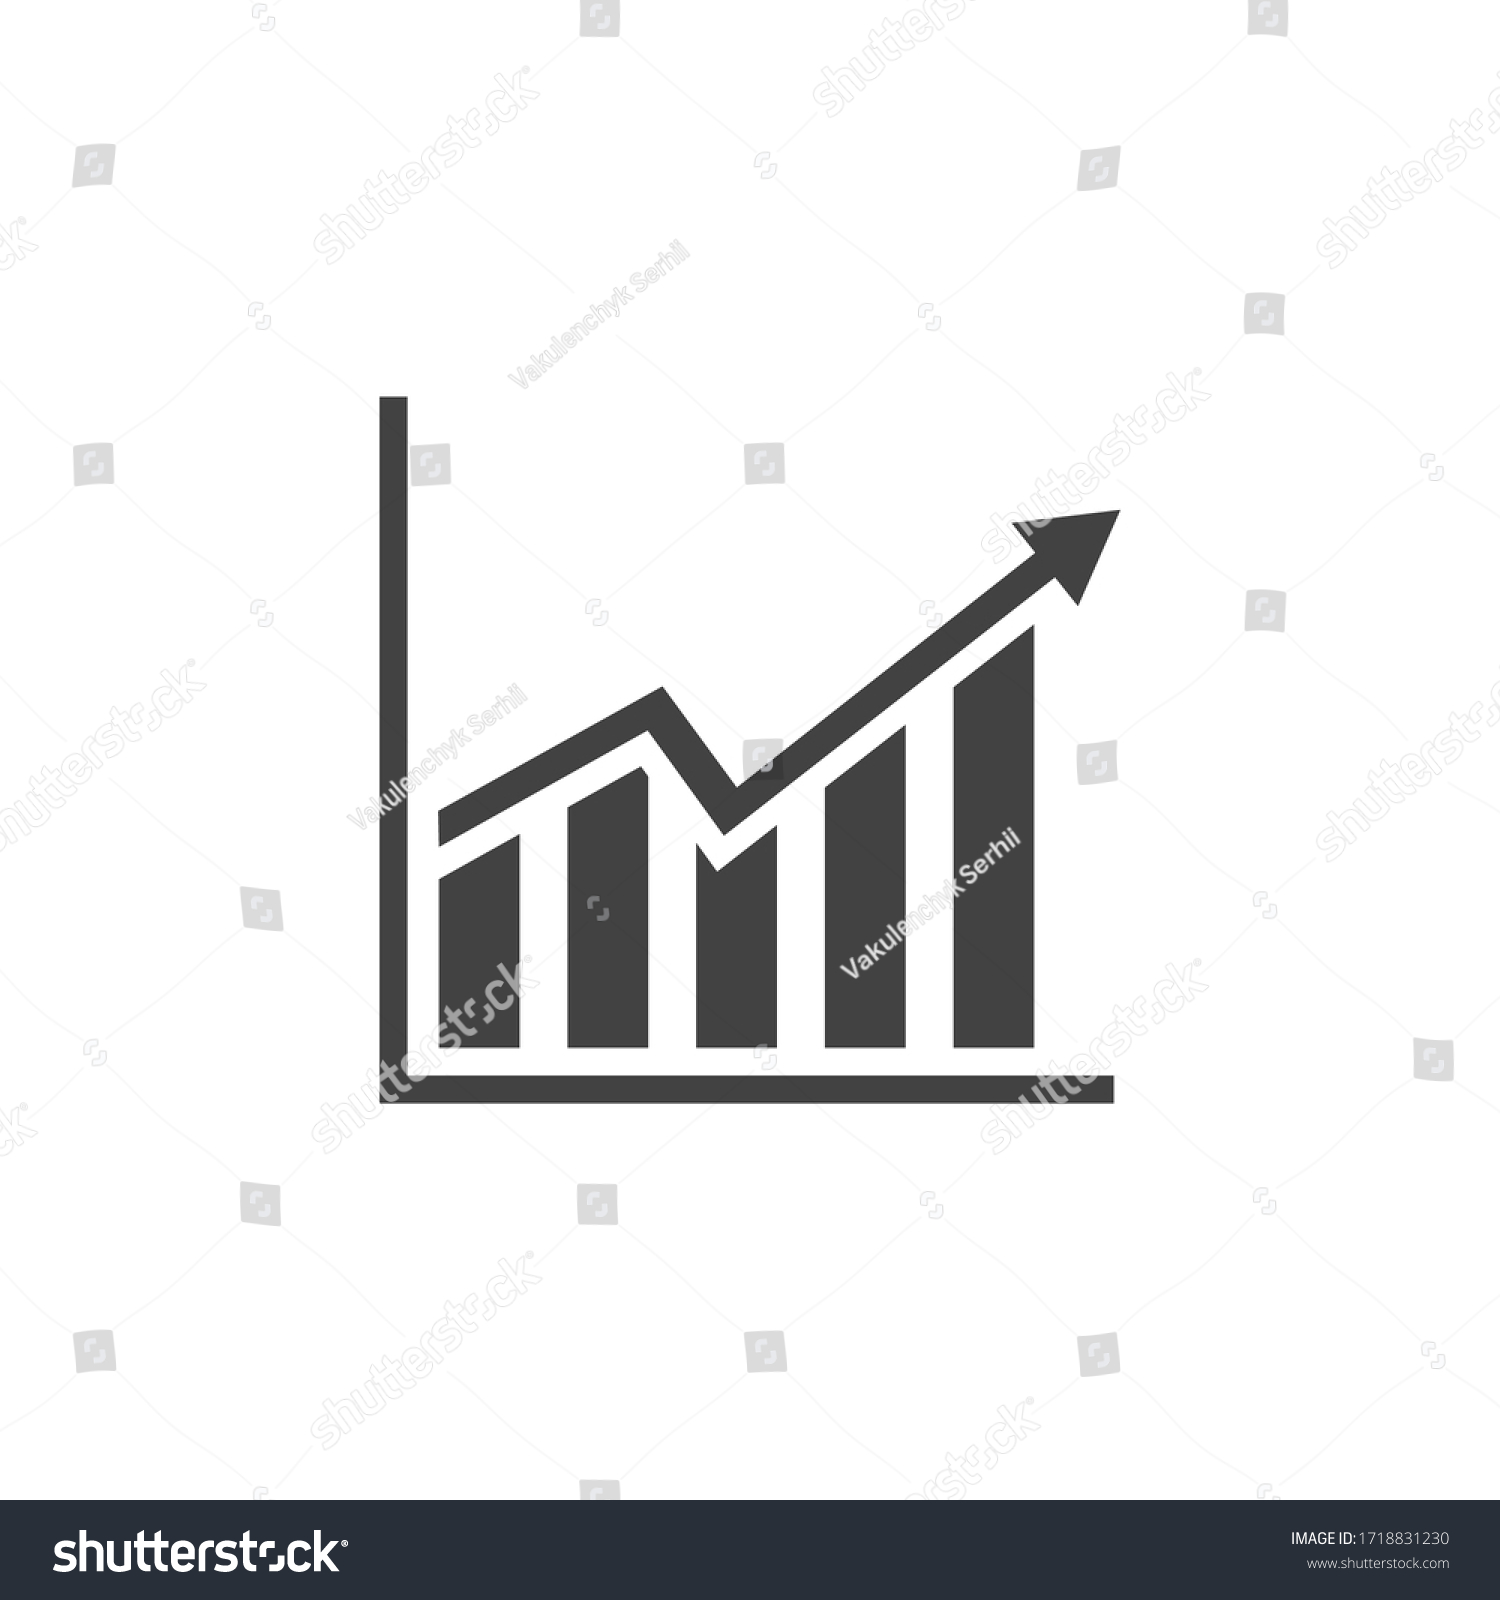 Economy growth icon, infographic, growth falling economy, business, finance vector illustration
 #1718831230